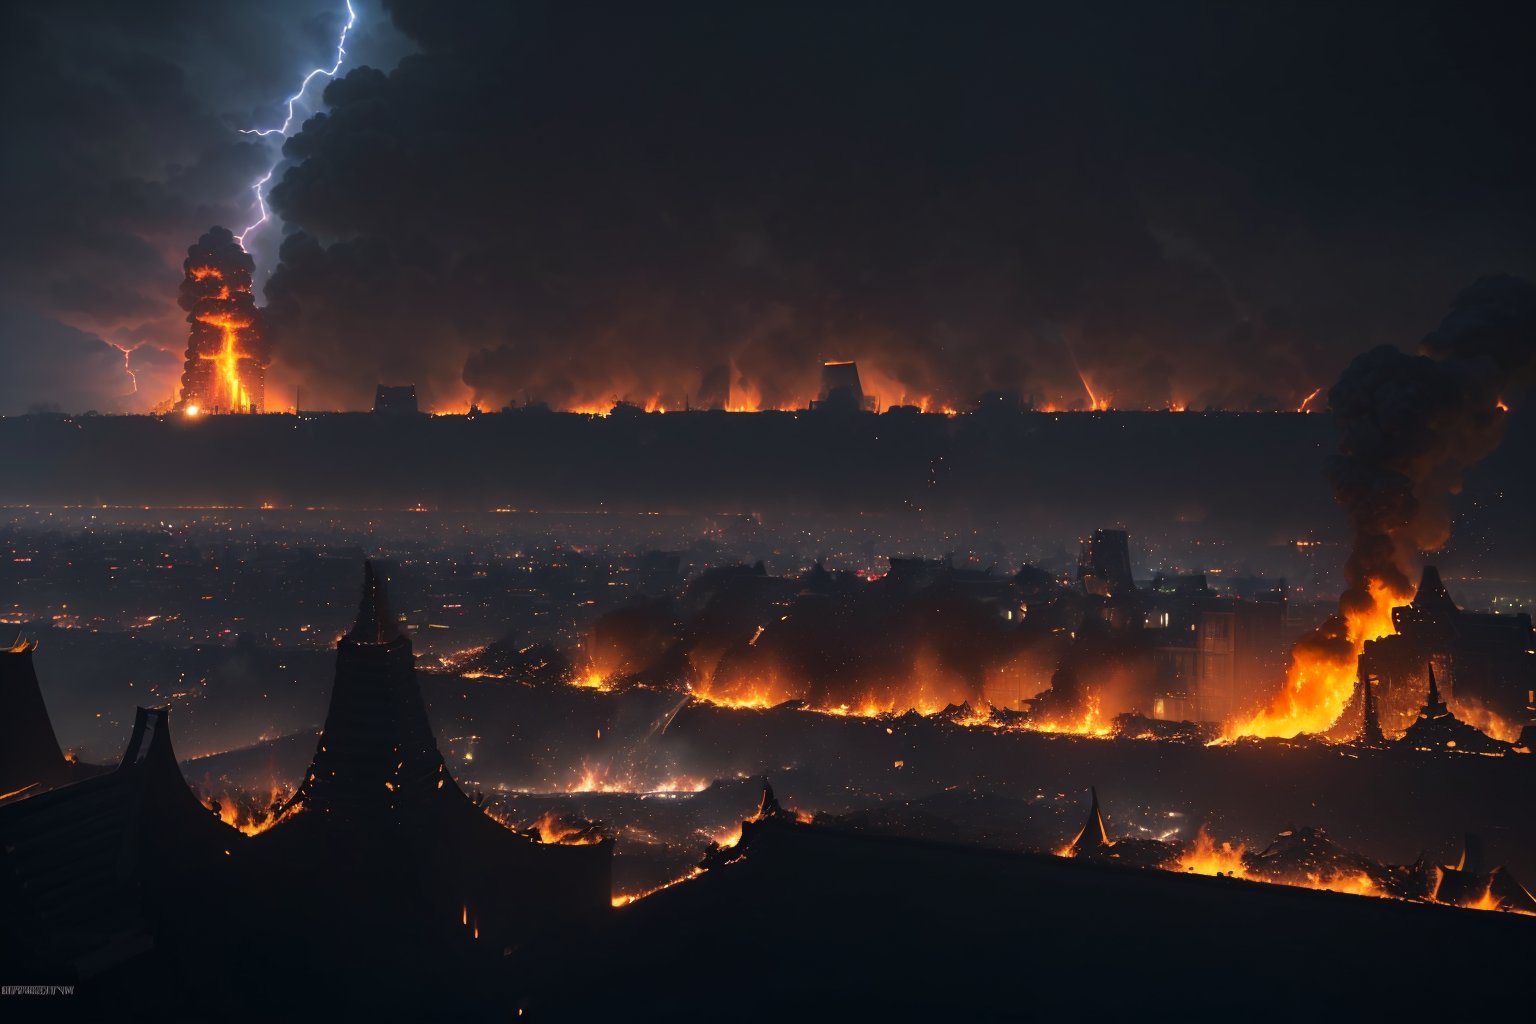 (((((Viewed_from_street:1.7))))),(((((dark_sky_with_lightning:1.7))))),(((((((burning_whole_Phnom_Penh_city_with_huge_larva_fire,ground_cracking,burning_buildings_falling_down:1.7))))))),4K cinematic quality reminiscent of an epic Steven Spielberg movie still, sharp focus on emitting diodes, smoke tendrils, artillery-induced sparks, with detailed racks and a motherboard evoking Pascal Blanche and Rutkowski Repin’s ArtStation hyperrealism, matte painting, character design detailed in the style of "Blade Runner," octane rendering